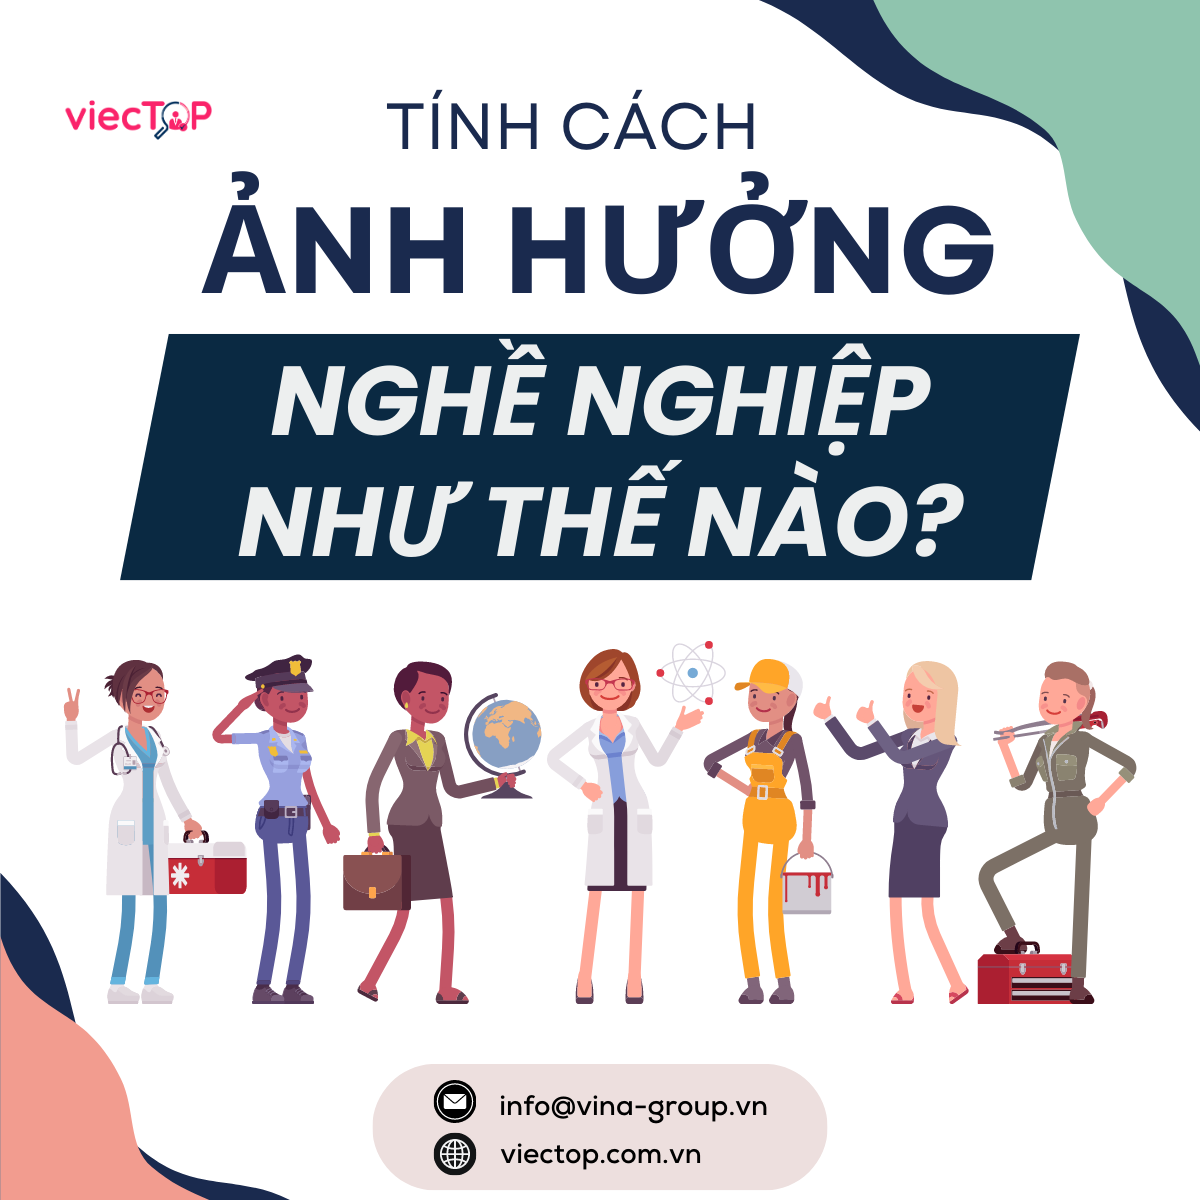 bat-mach-tinh-cach-dinh-huong-nghe-nghiep-trong-tuong-lai-2